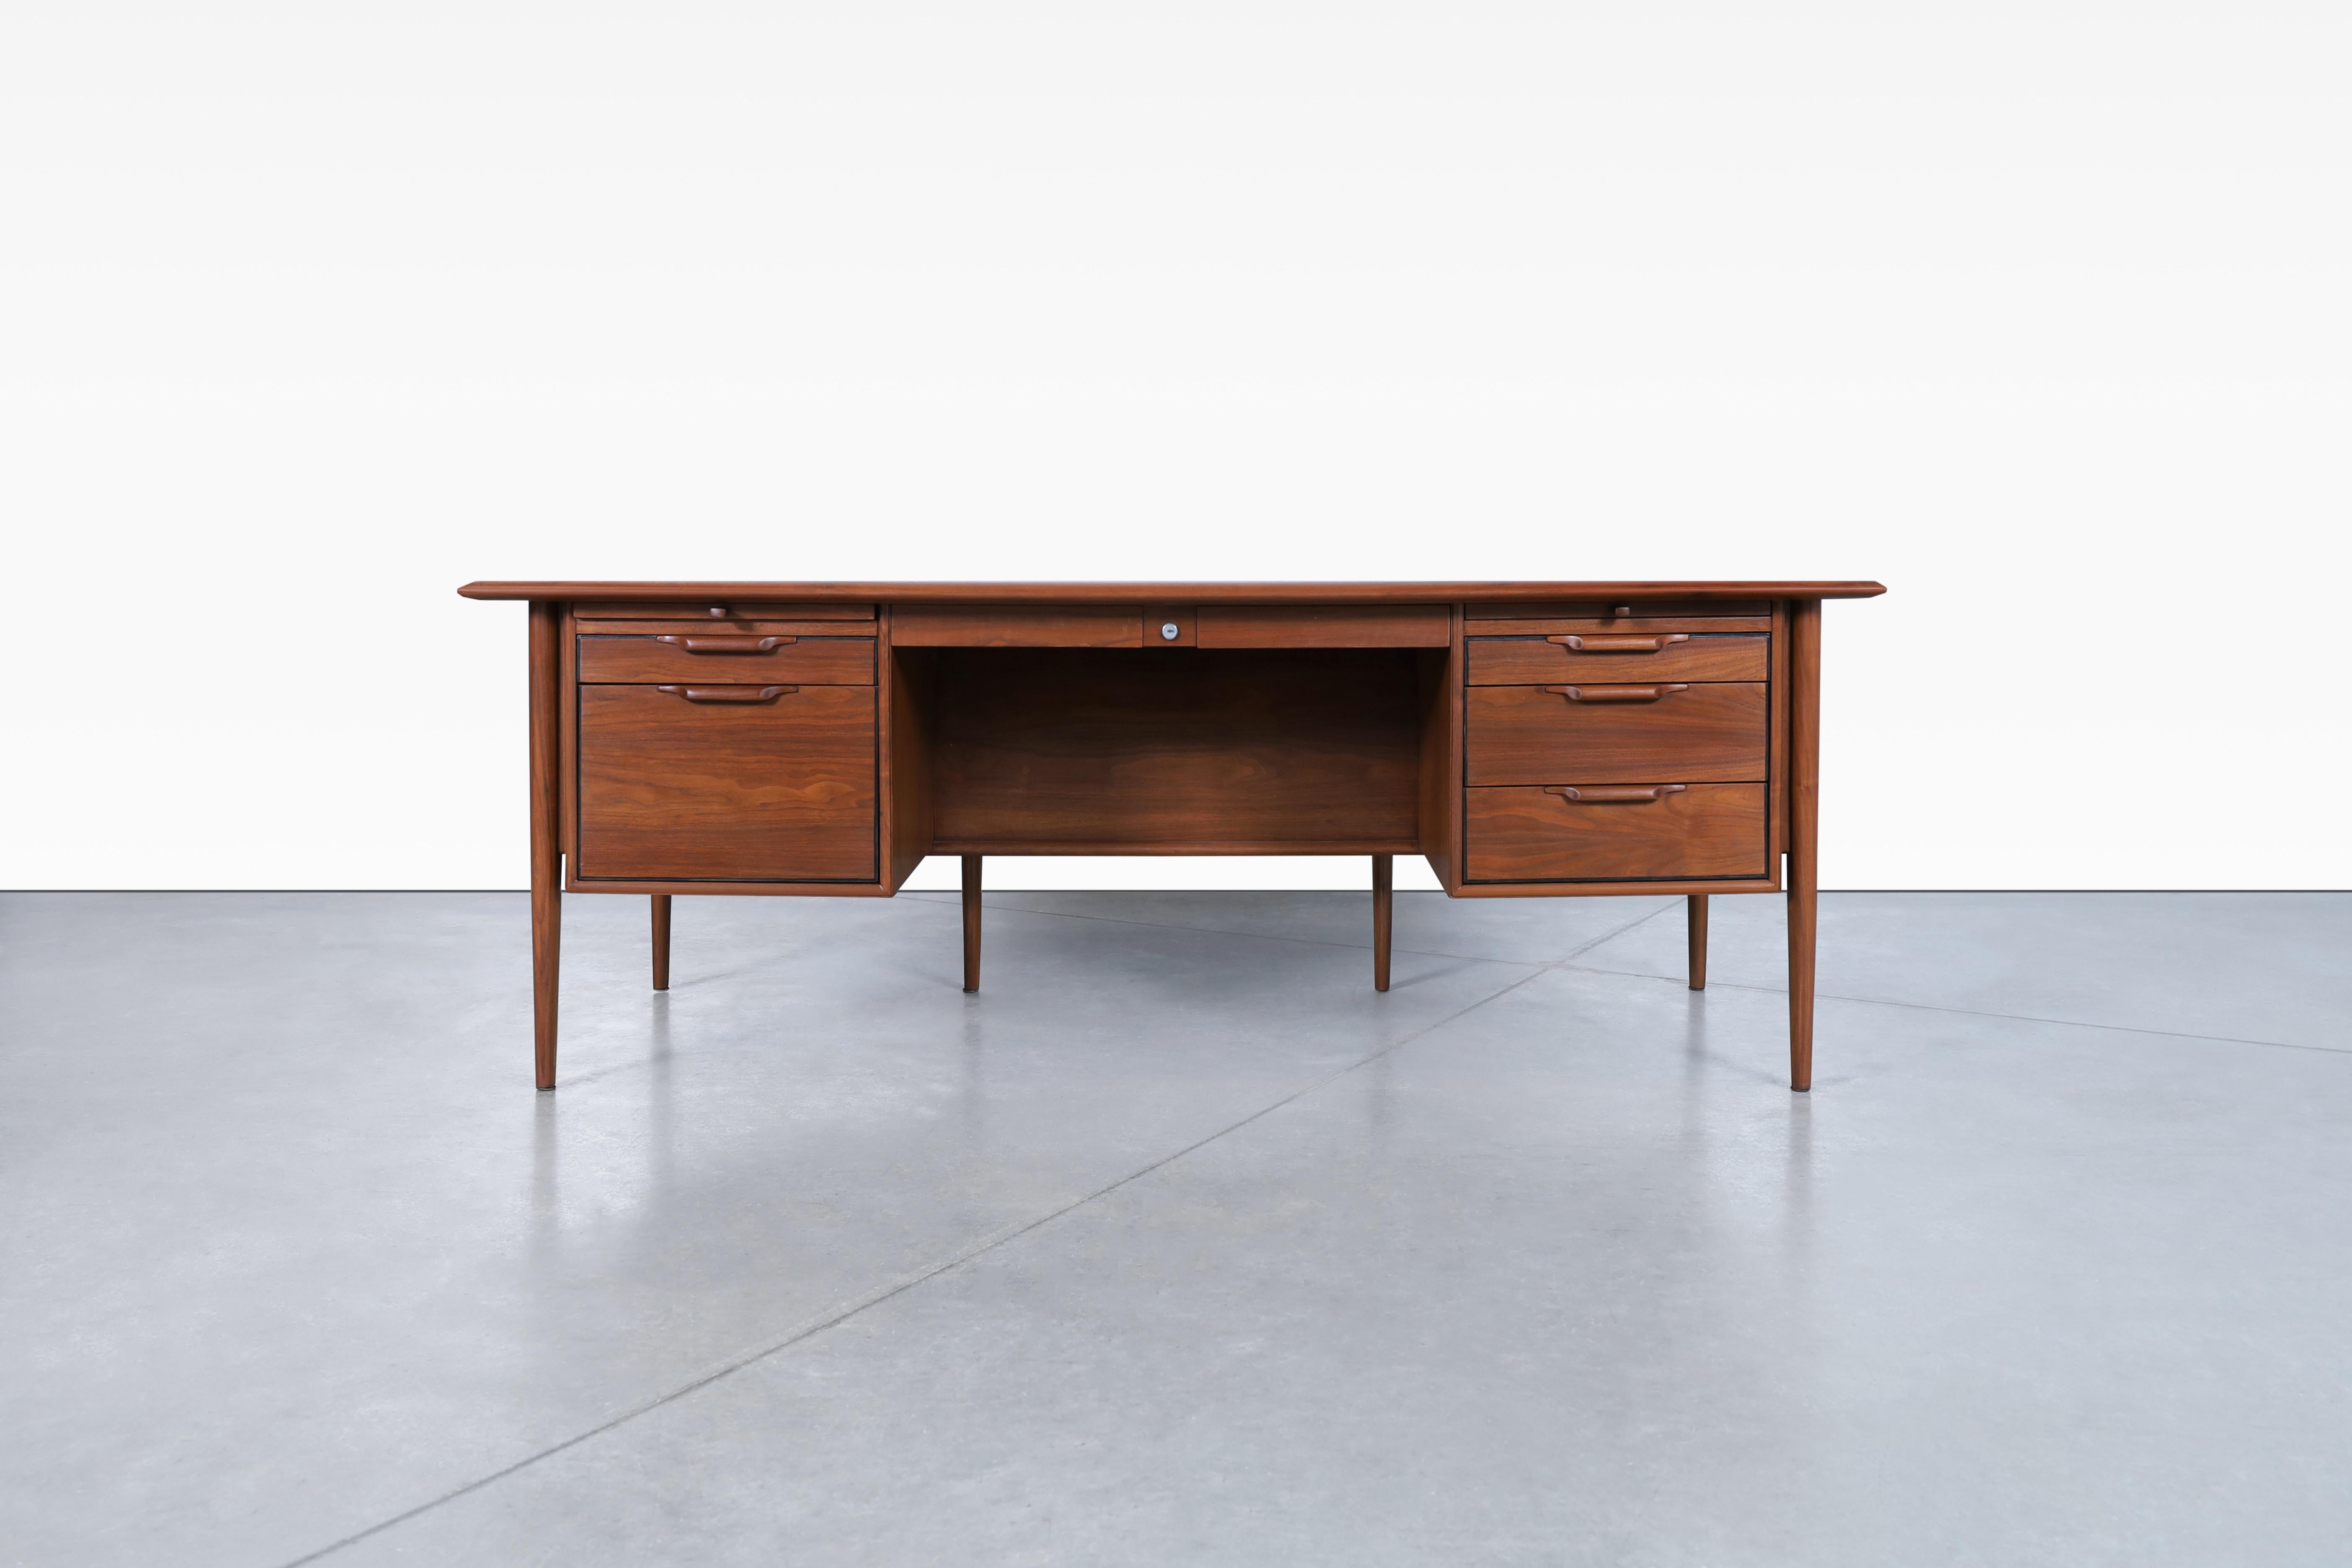 Fantastic mid-century walnut “Castillian” executive desk by Alma made in the United States, circa 1960s. Crafted with exquisite walnut and adorned with a luxurious leather top and back, this desk exudes a sense of elegance and refinement. The desk